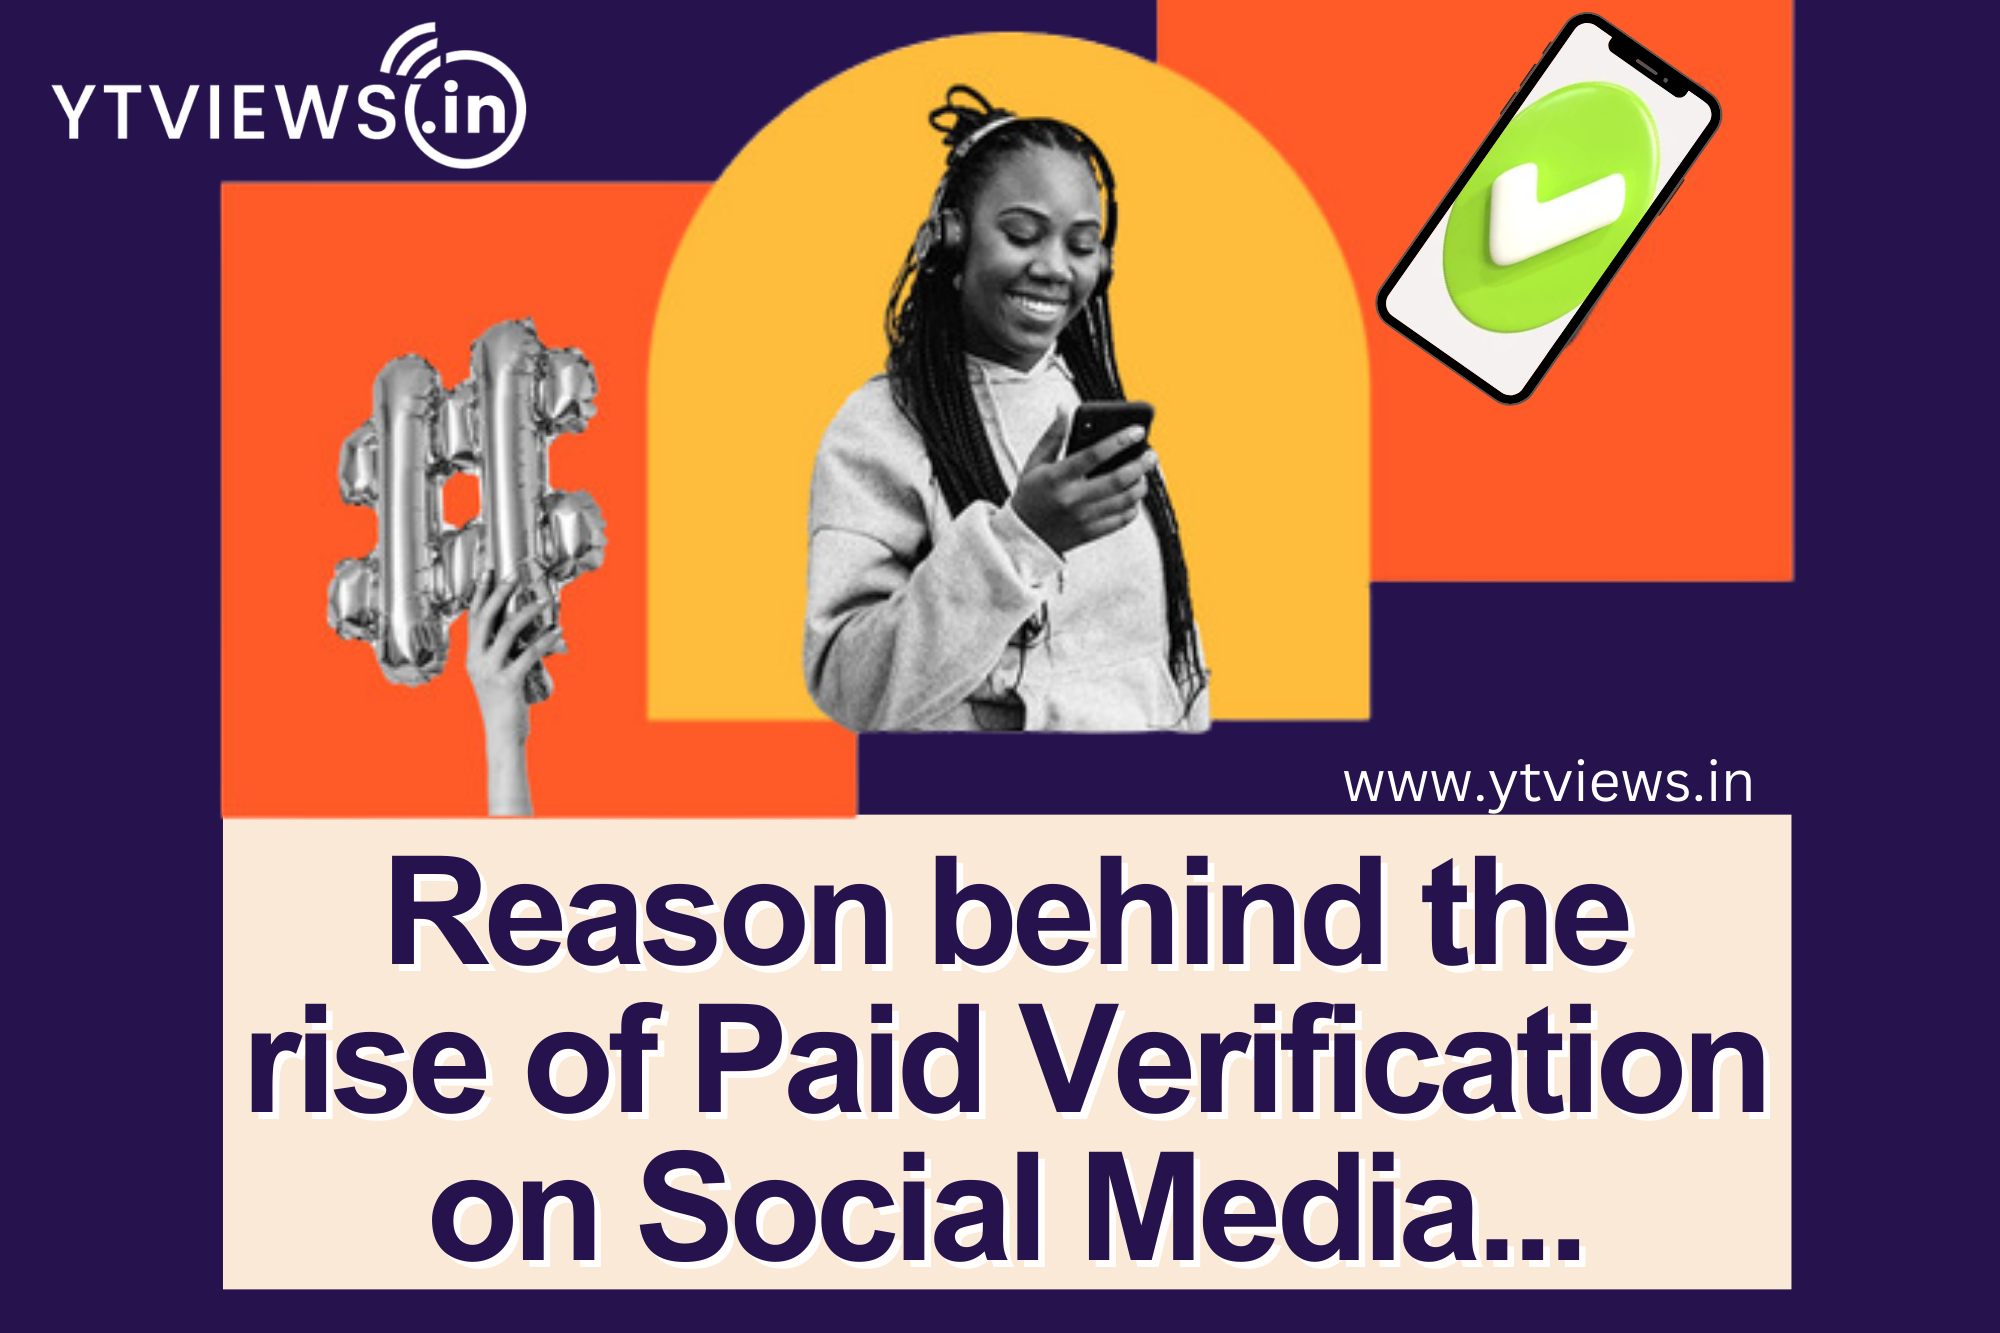 The reason behind the rise of paid verification on social media